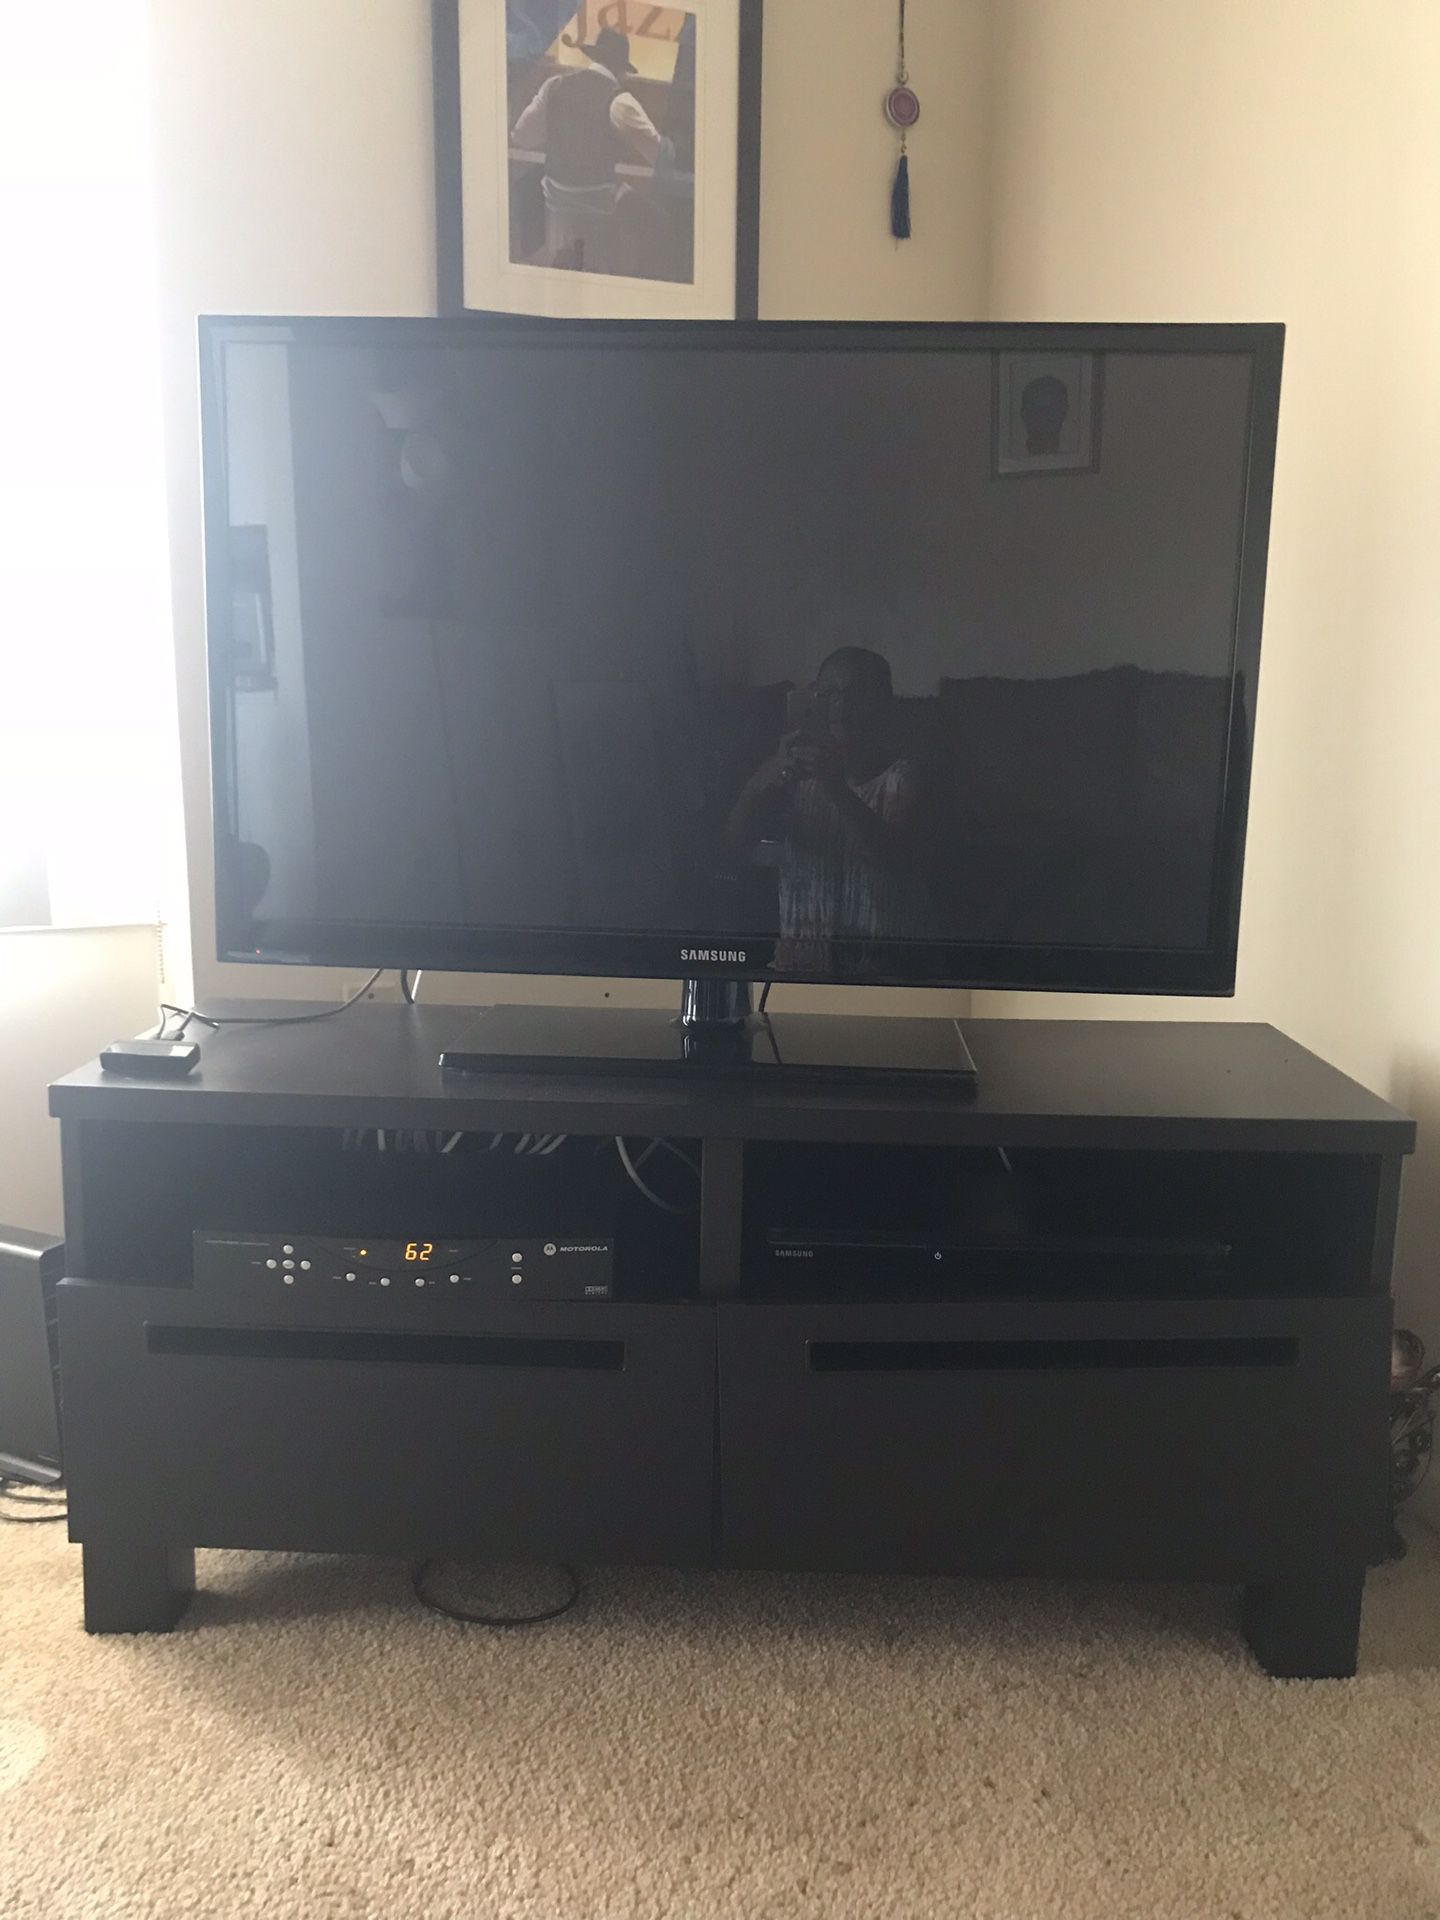 Moving out of the country! Smart Samsung TV 46’’ plus table stand for only $250